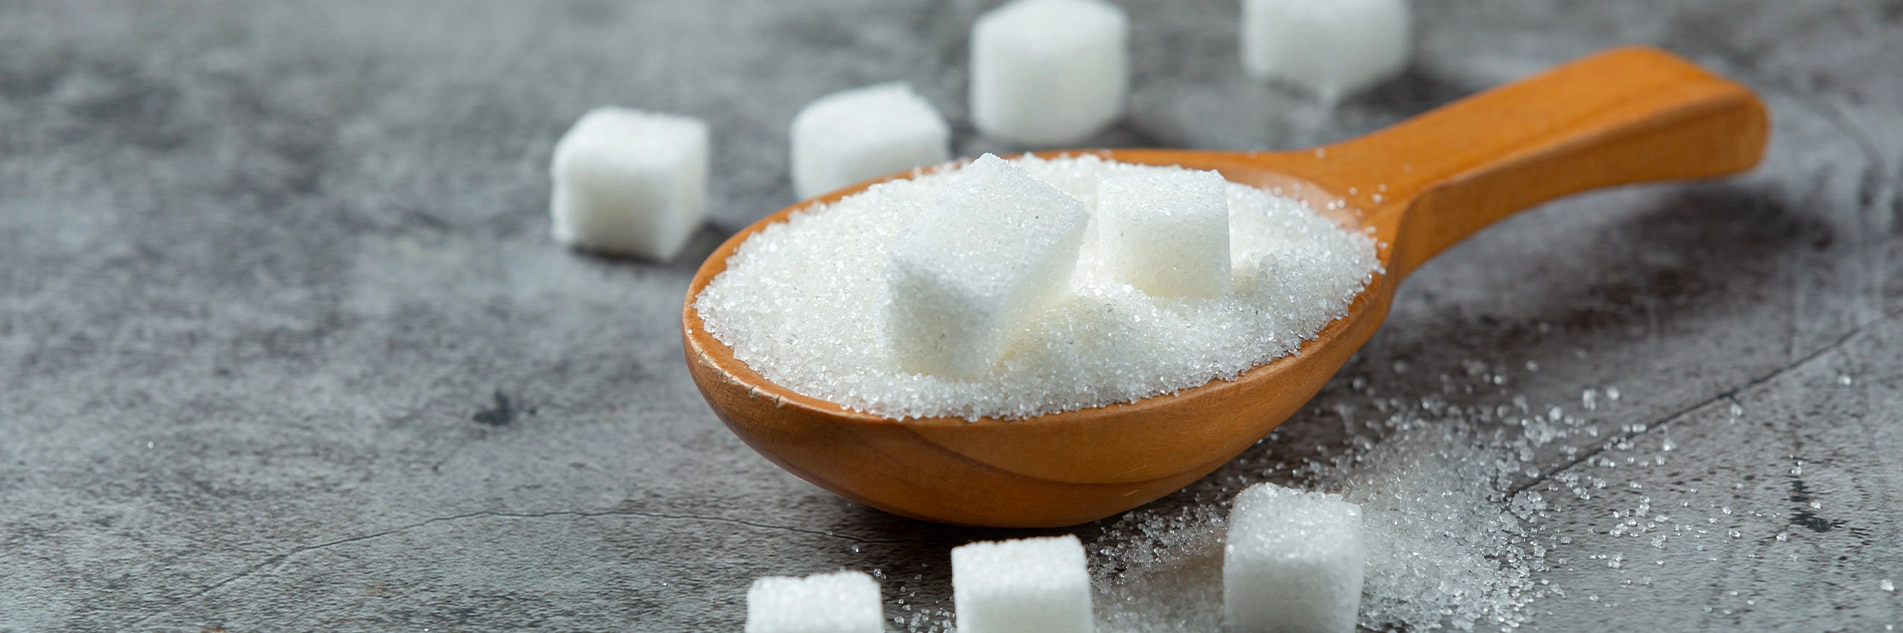 Ways-to-Reduce-Sugar-in-Food-Products